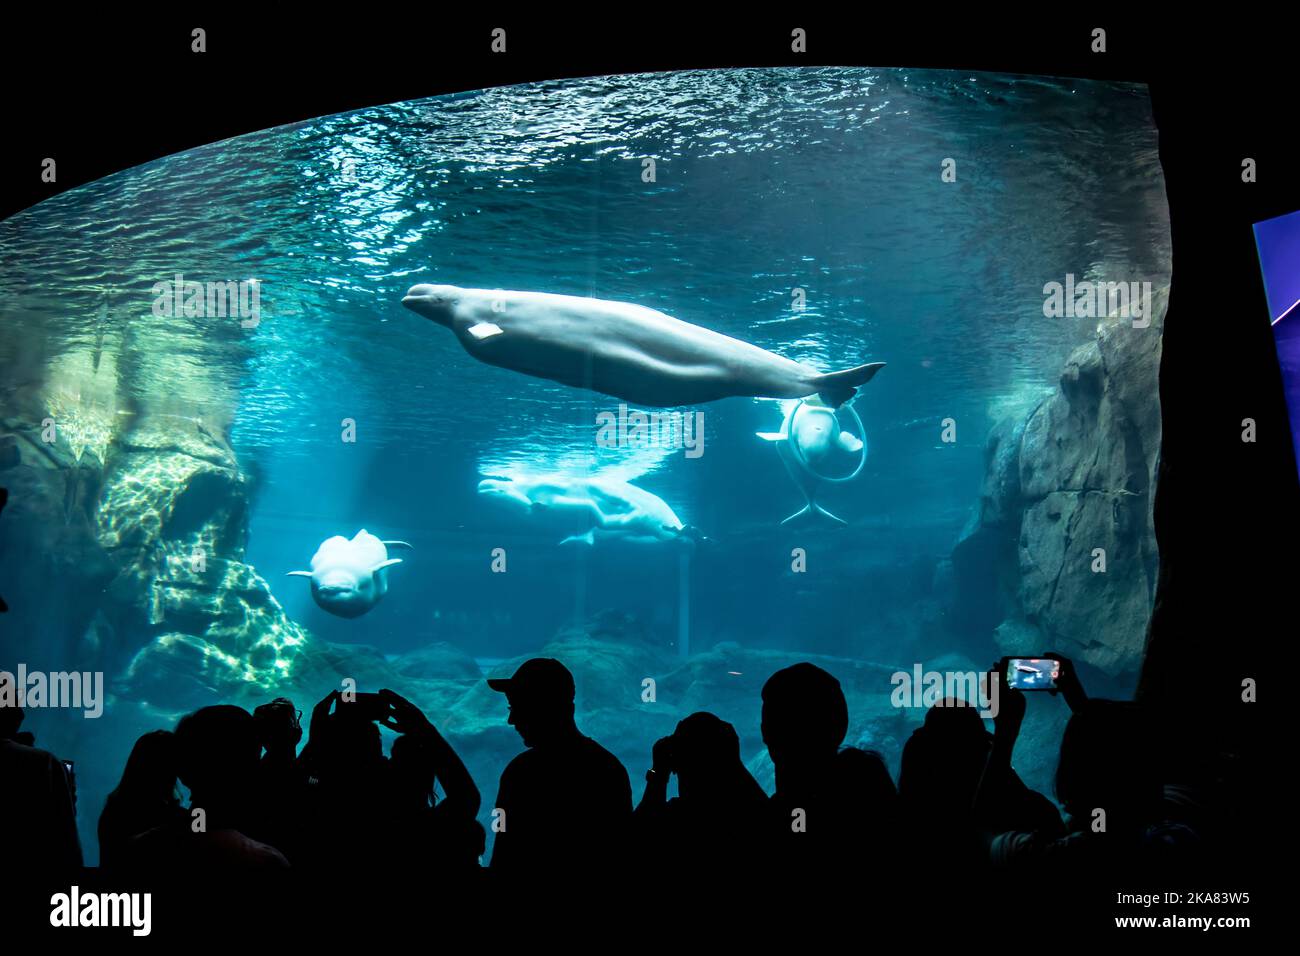 Tourists are watching beluga whales (Delphinapterus leucas) is swimming in Cold Water Quest of Georgia Aquarium in Atlanta USA. Stock Photo